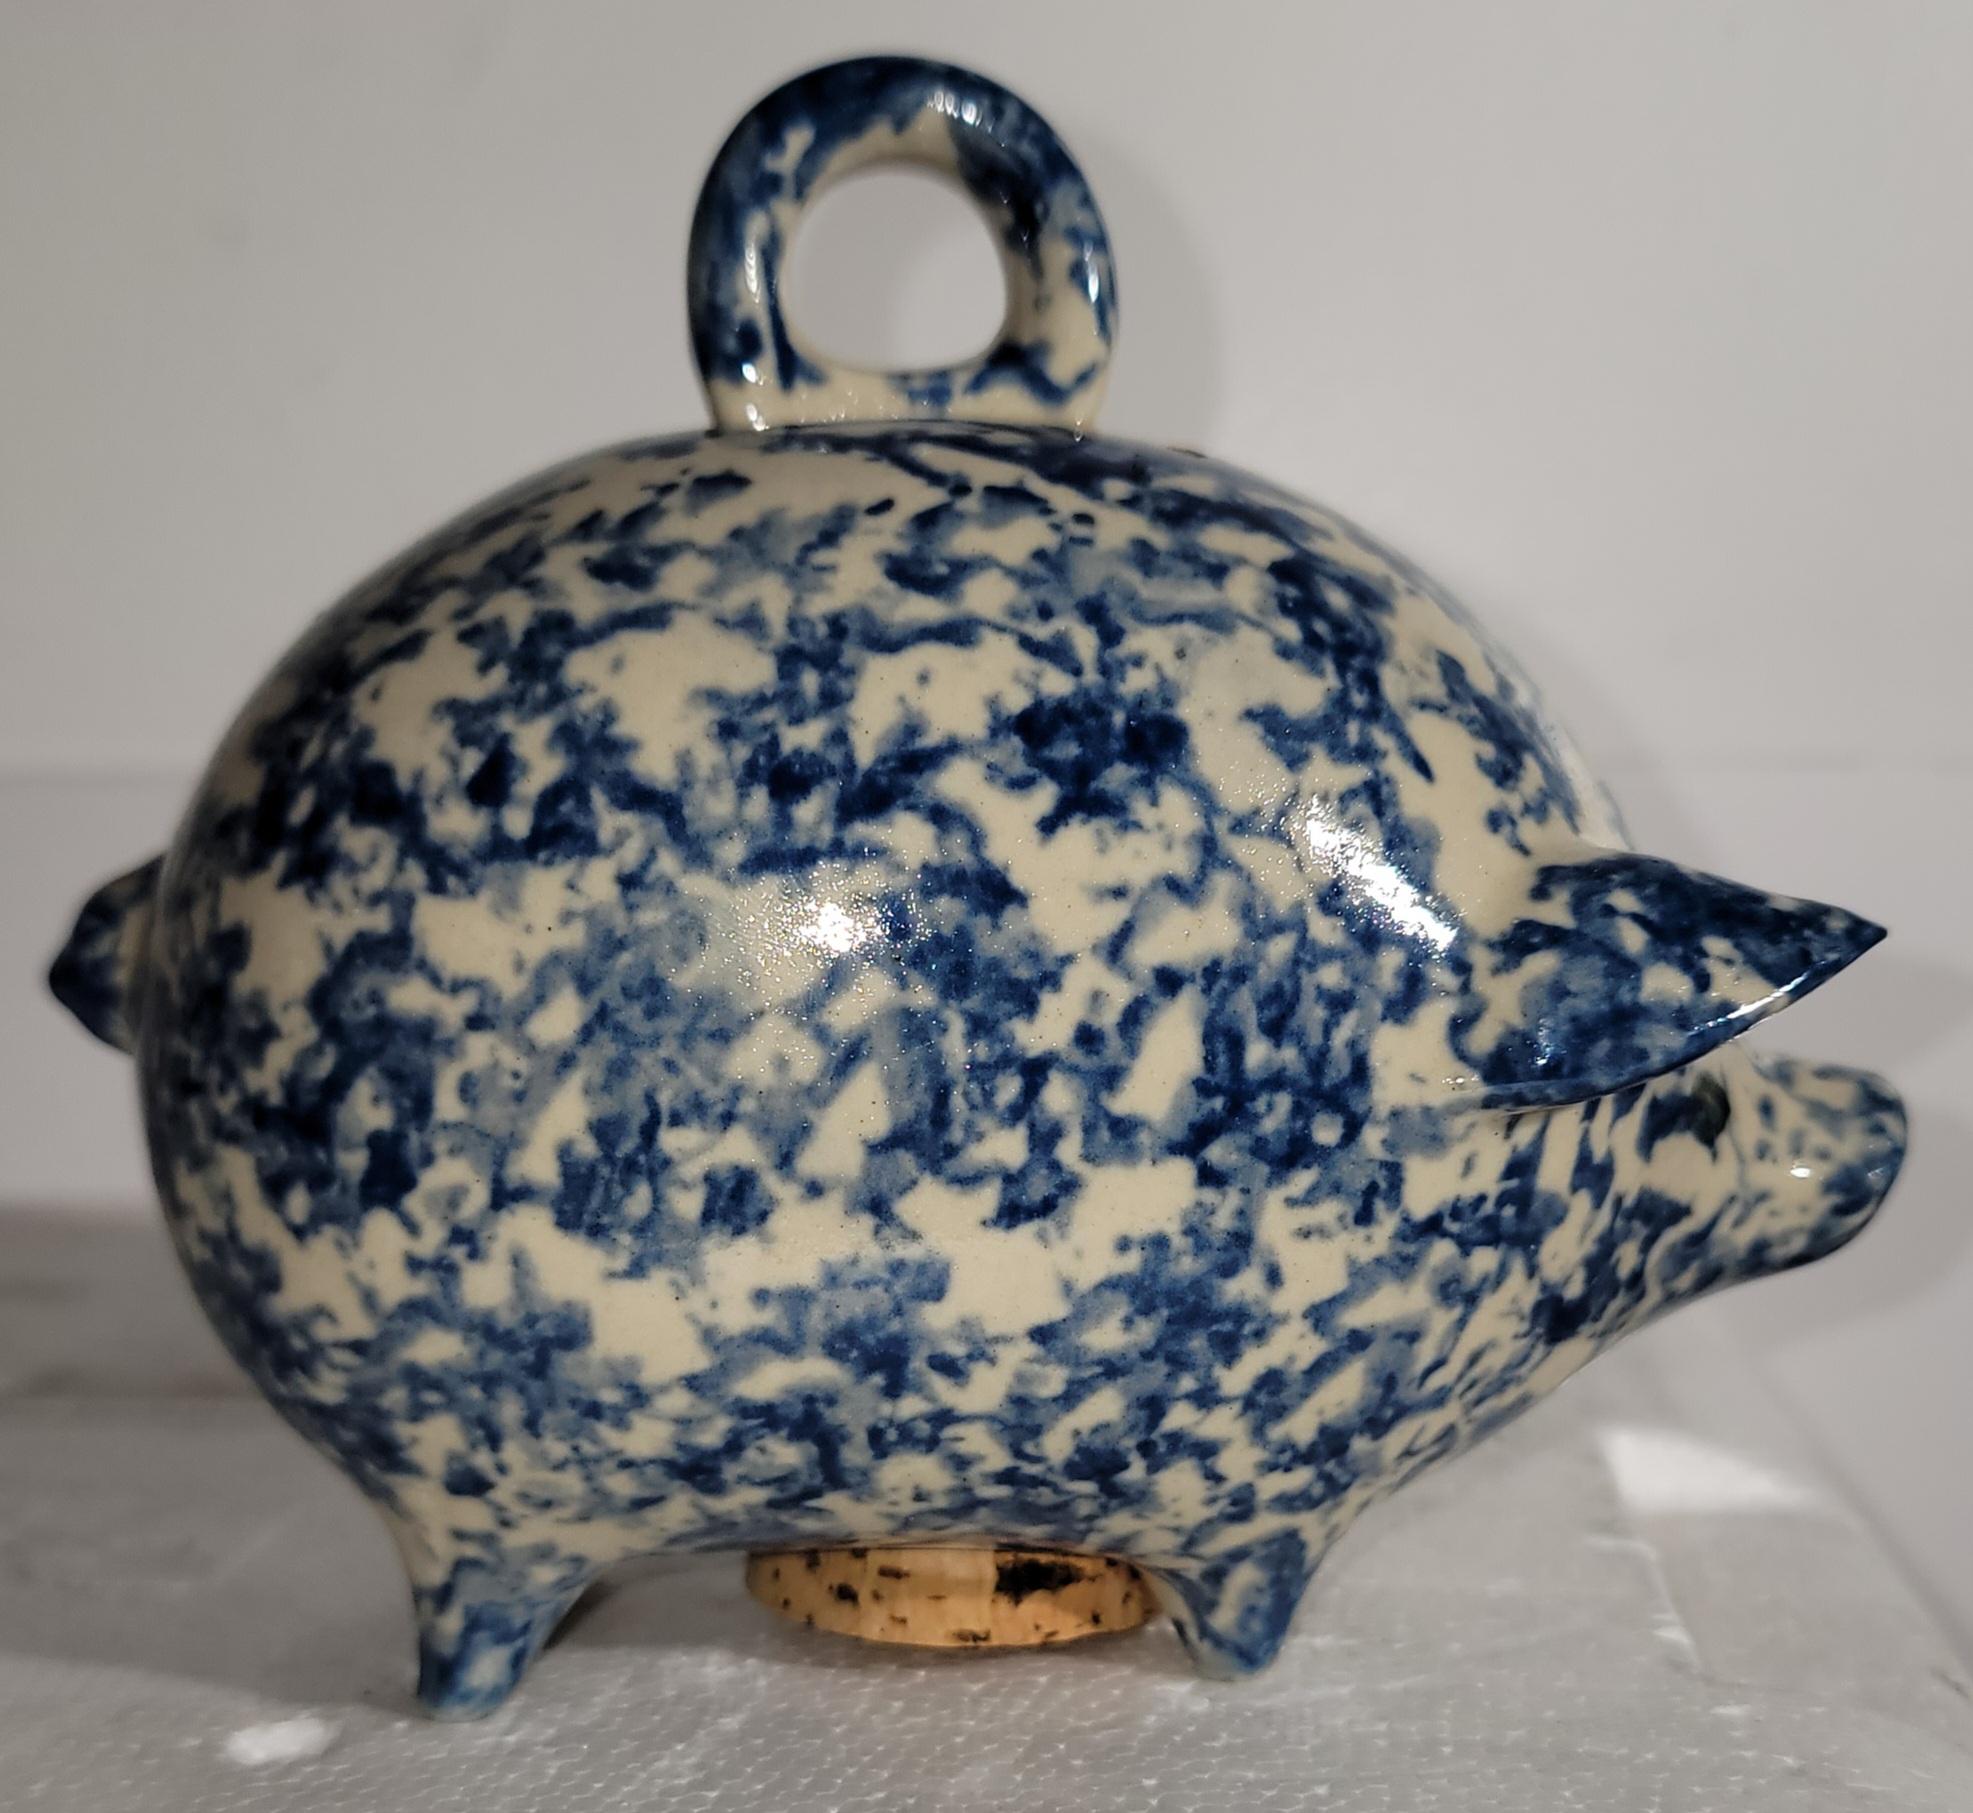 20Thc Blue & white sponge ware piggy bank from New England. The condition is very good with a cork in the base.